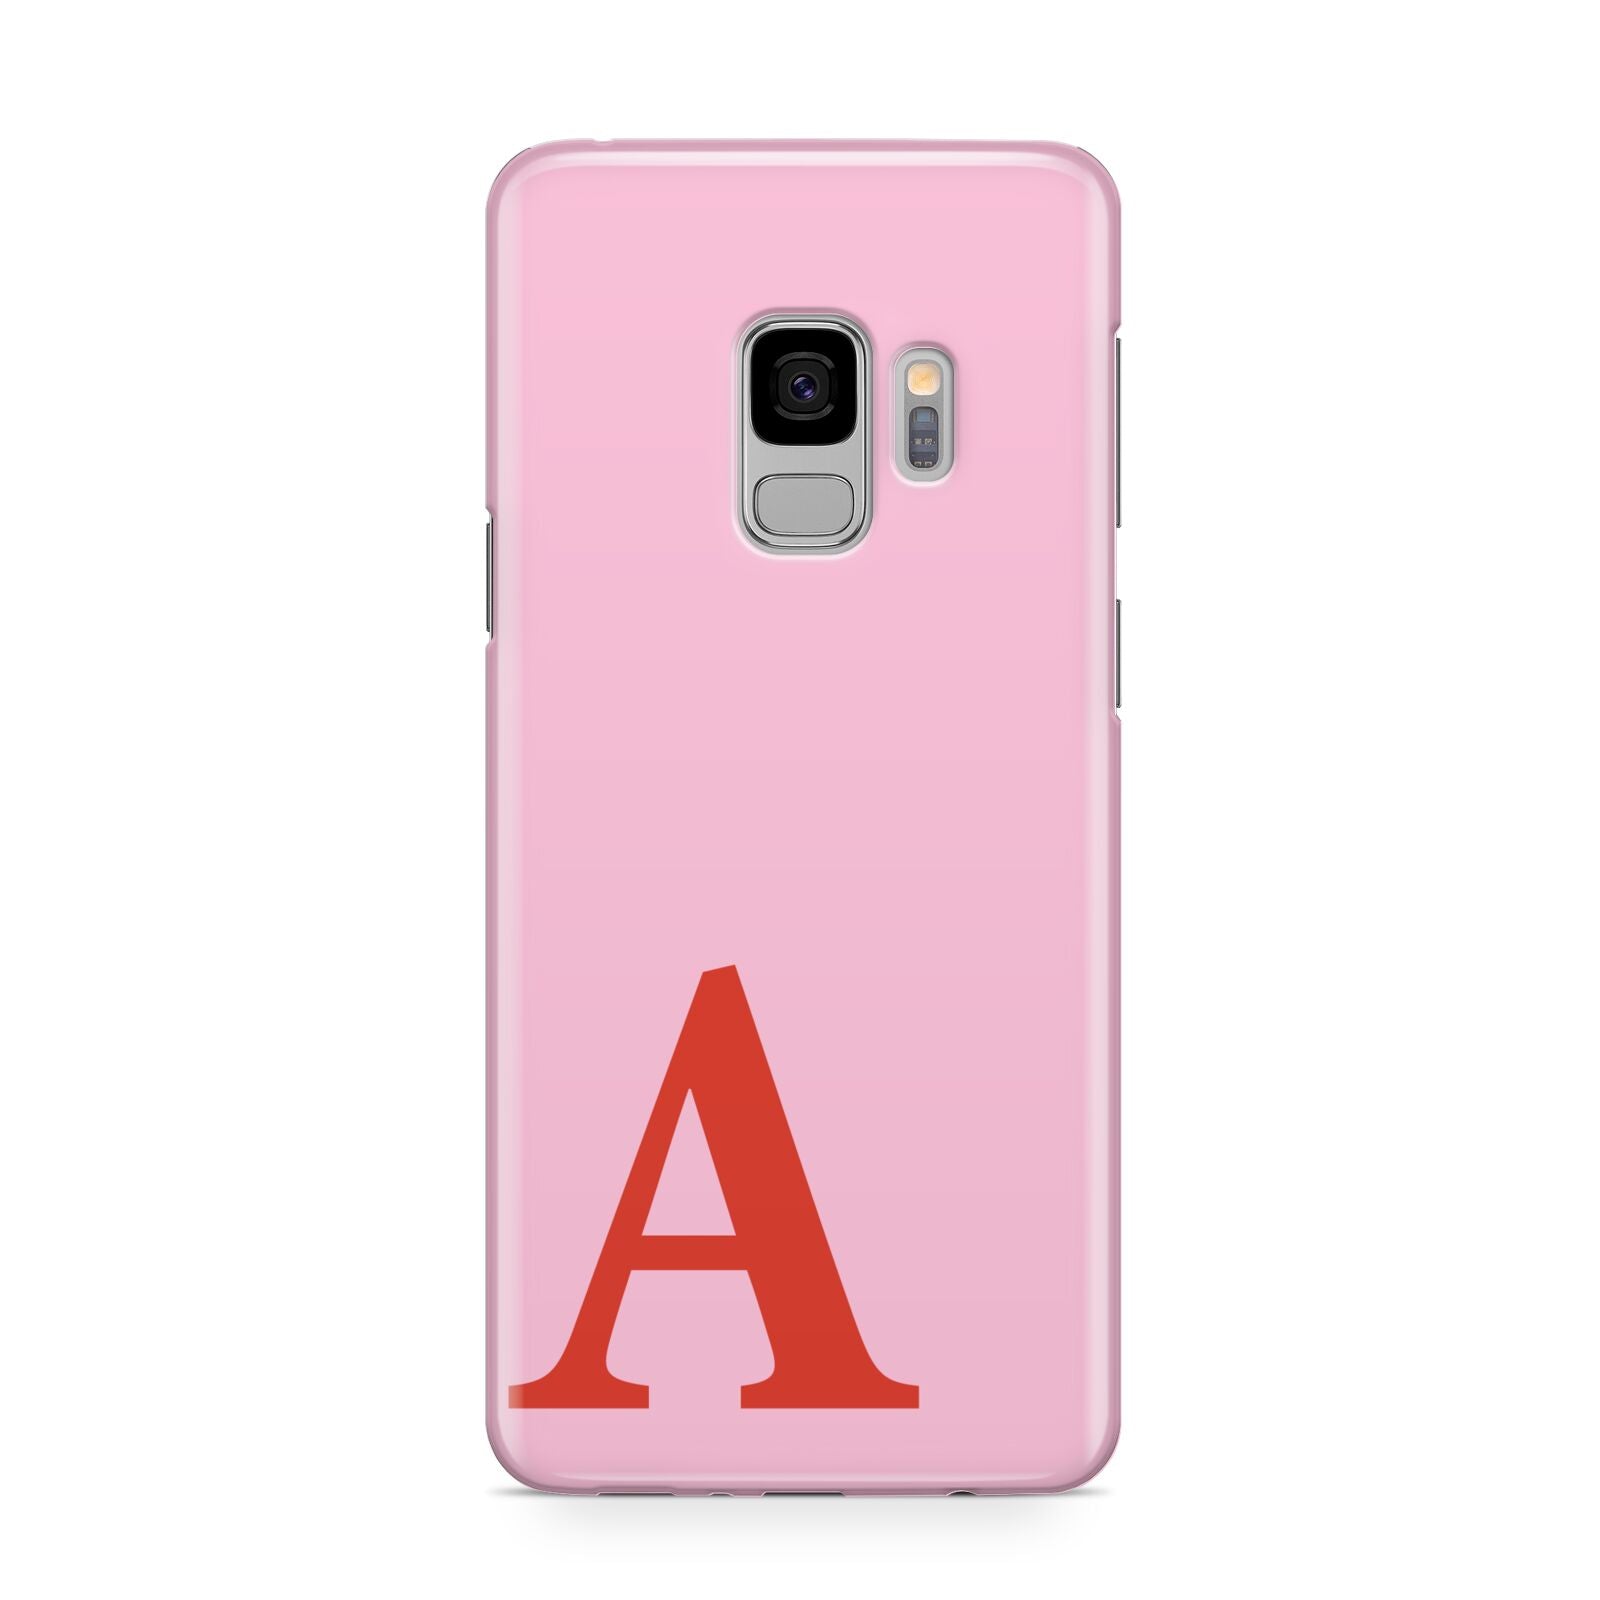 Personalised Pink and Red Samsung Galaxy S9 Case